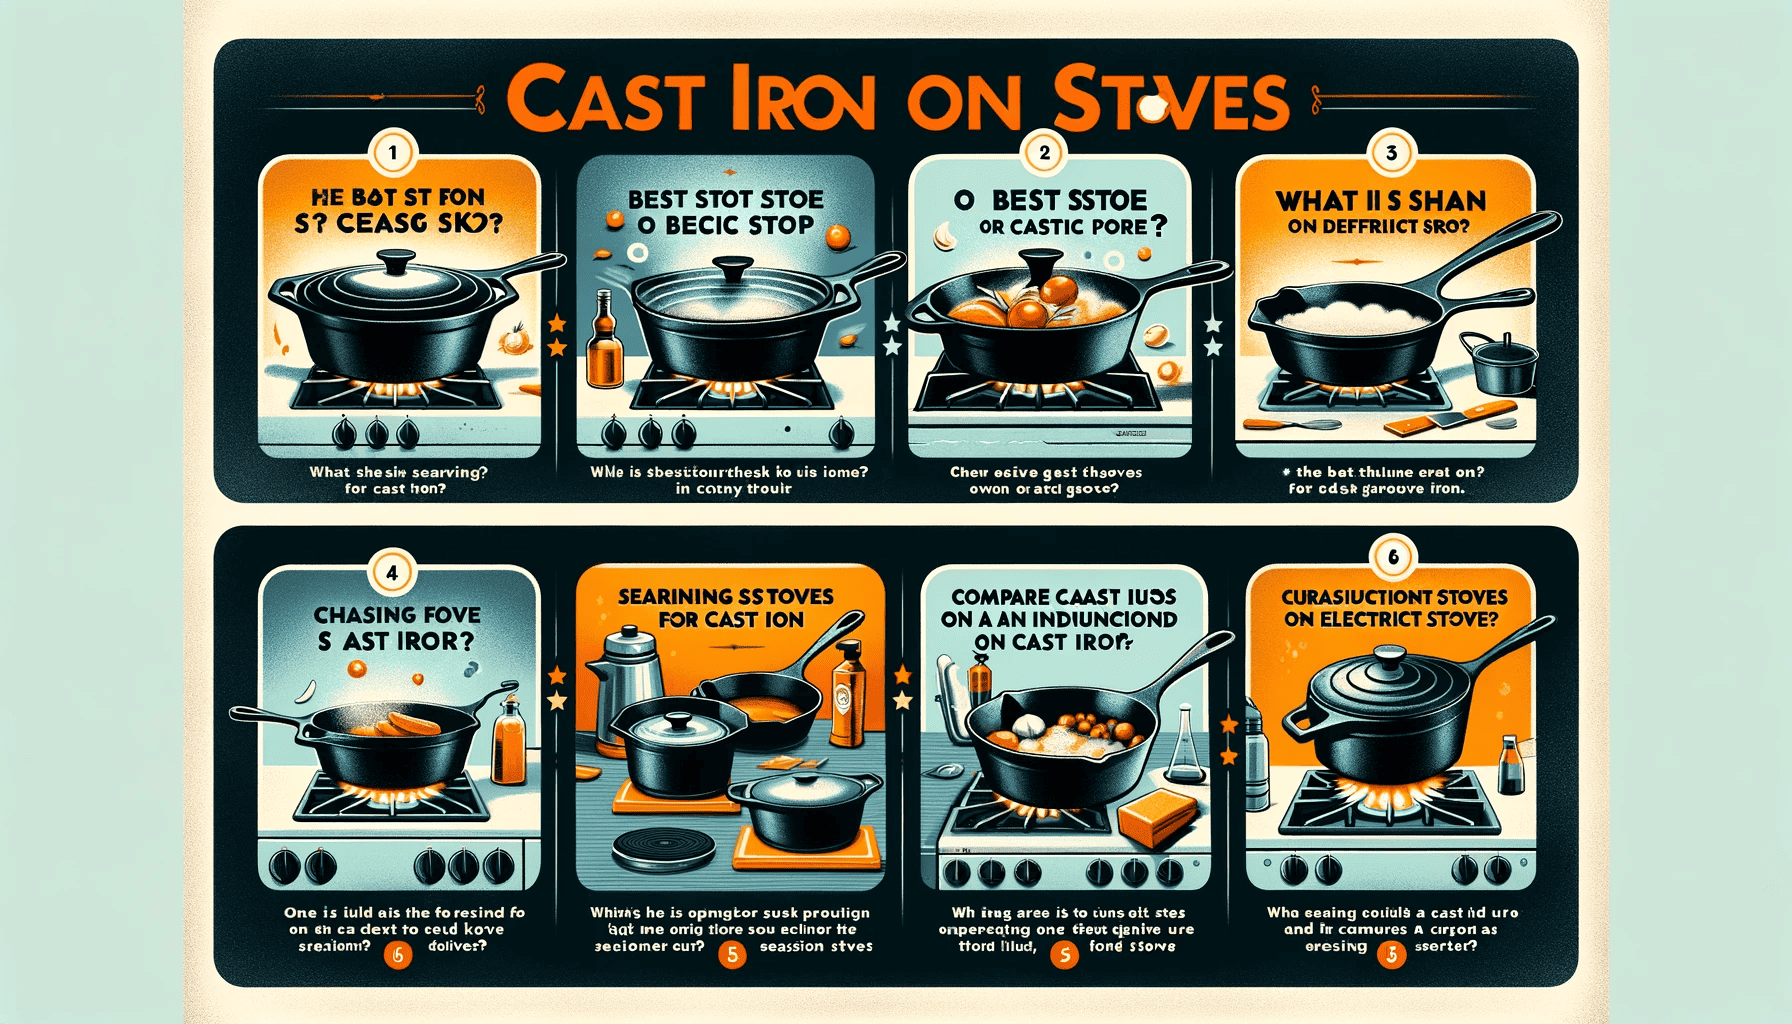 Best Stoves for Cast Iron